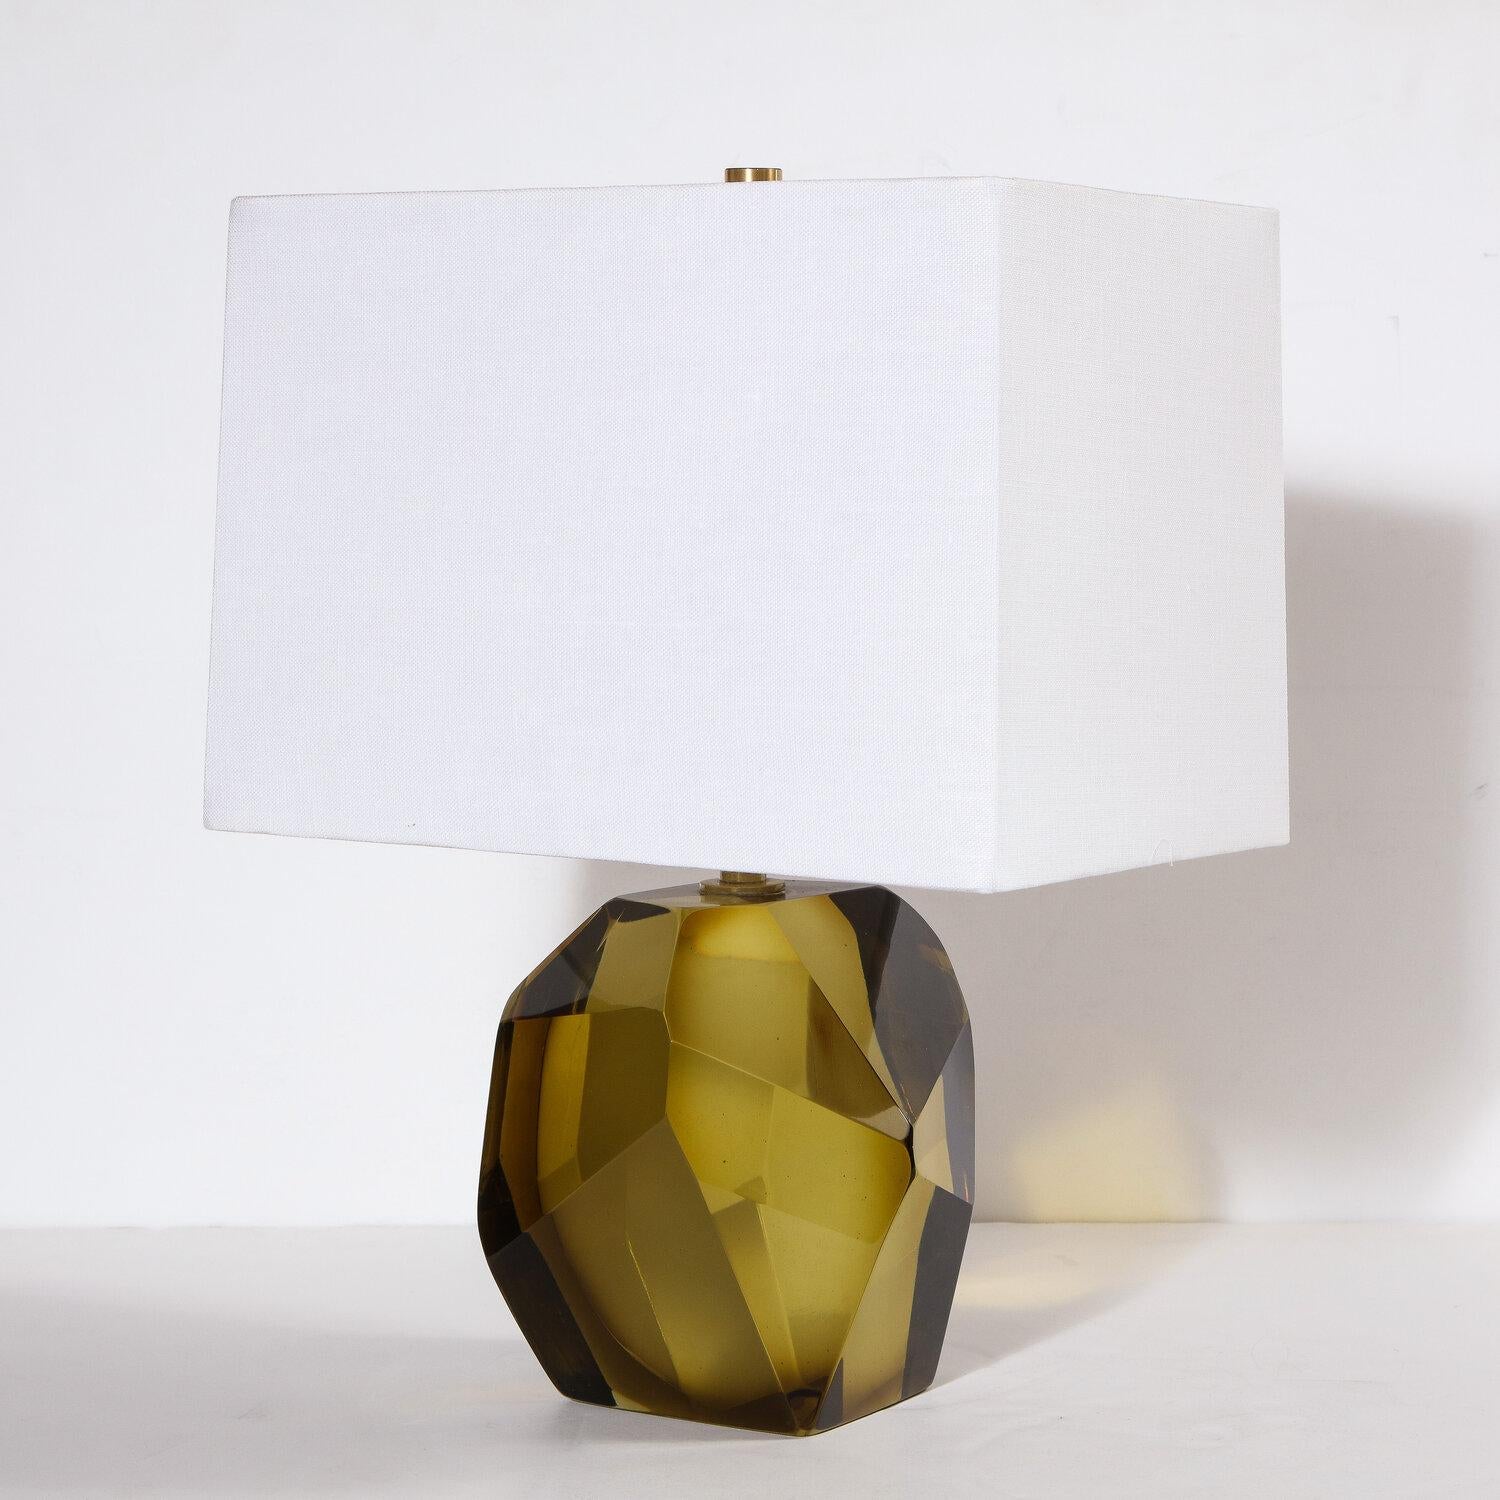 This stunning and elegant pair of table lamps were realized in Murano, Italy- the island off the coast of Venice renowned for centuries for its superlative glass production. They feature faceted bodies- like oversized cut gemstones- in a gorgeous